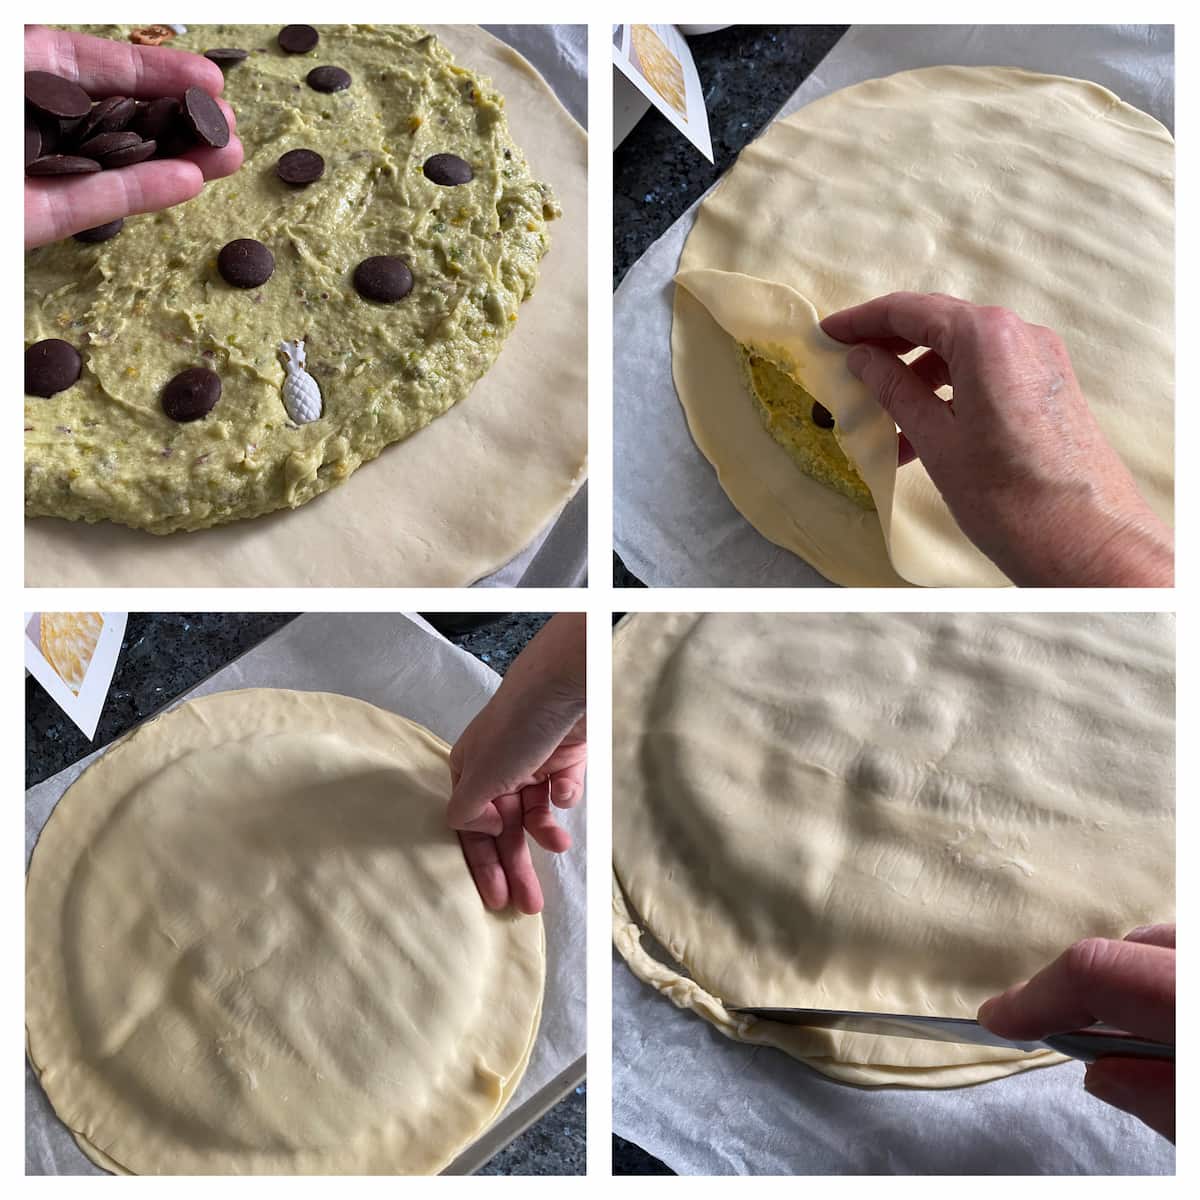 pressing down the second circle of puff pastry over the first covered in almond and pistachio cream